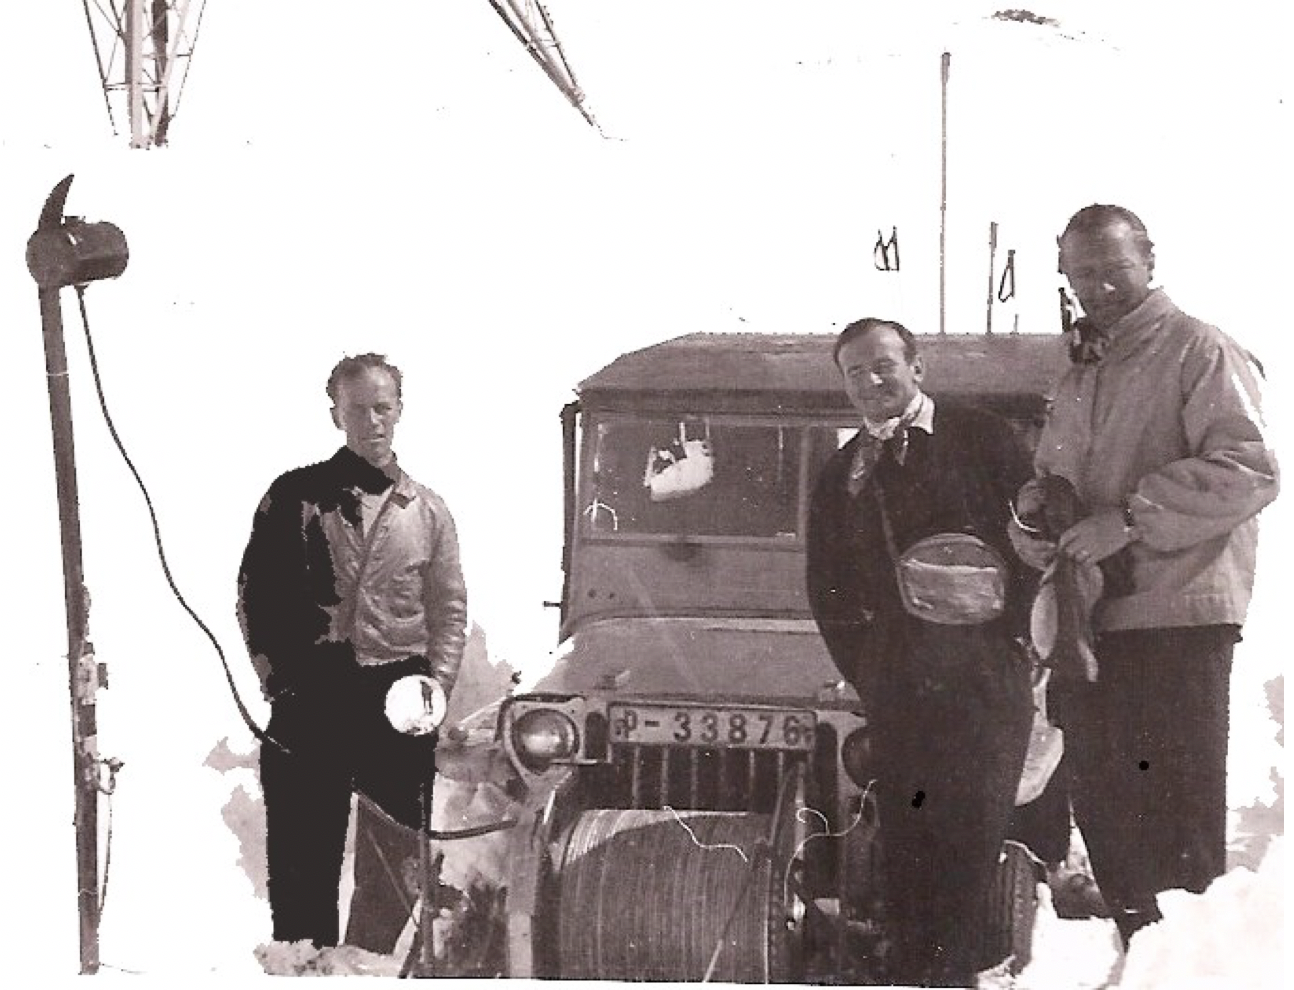 Black and white image of men and a vintage rope tow